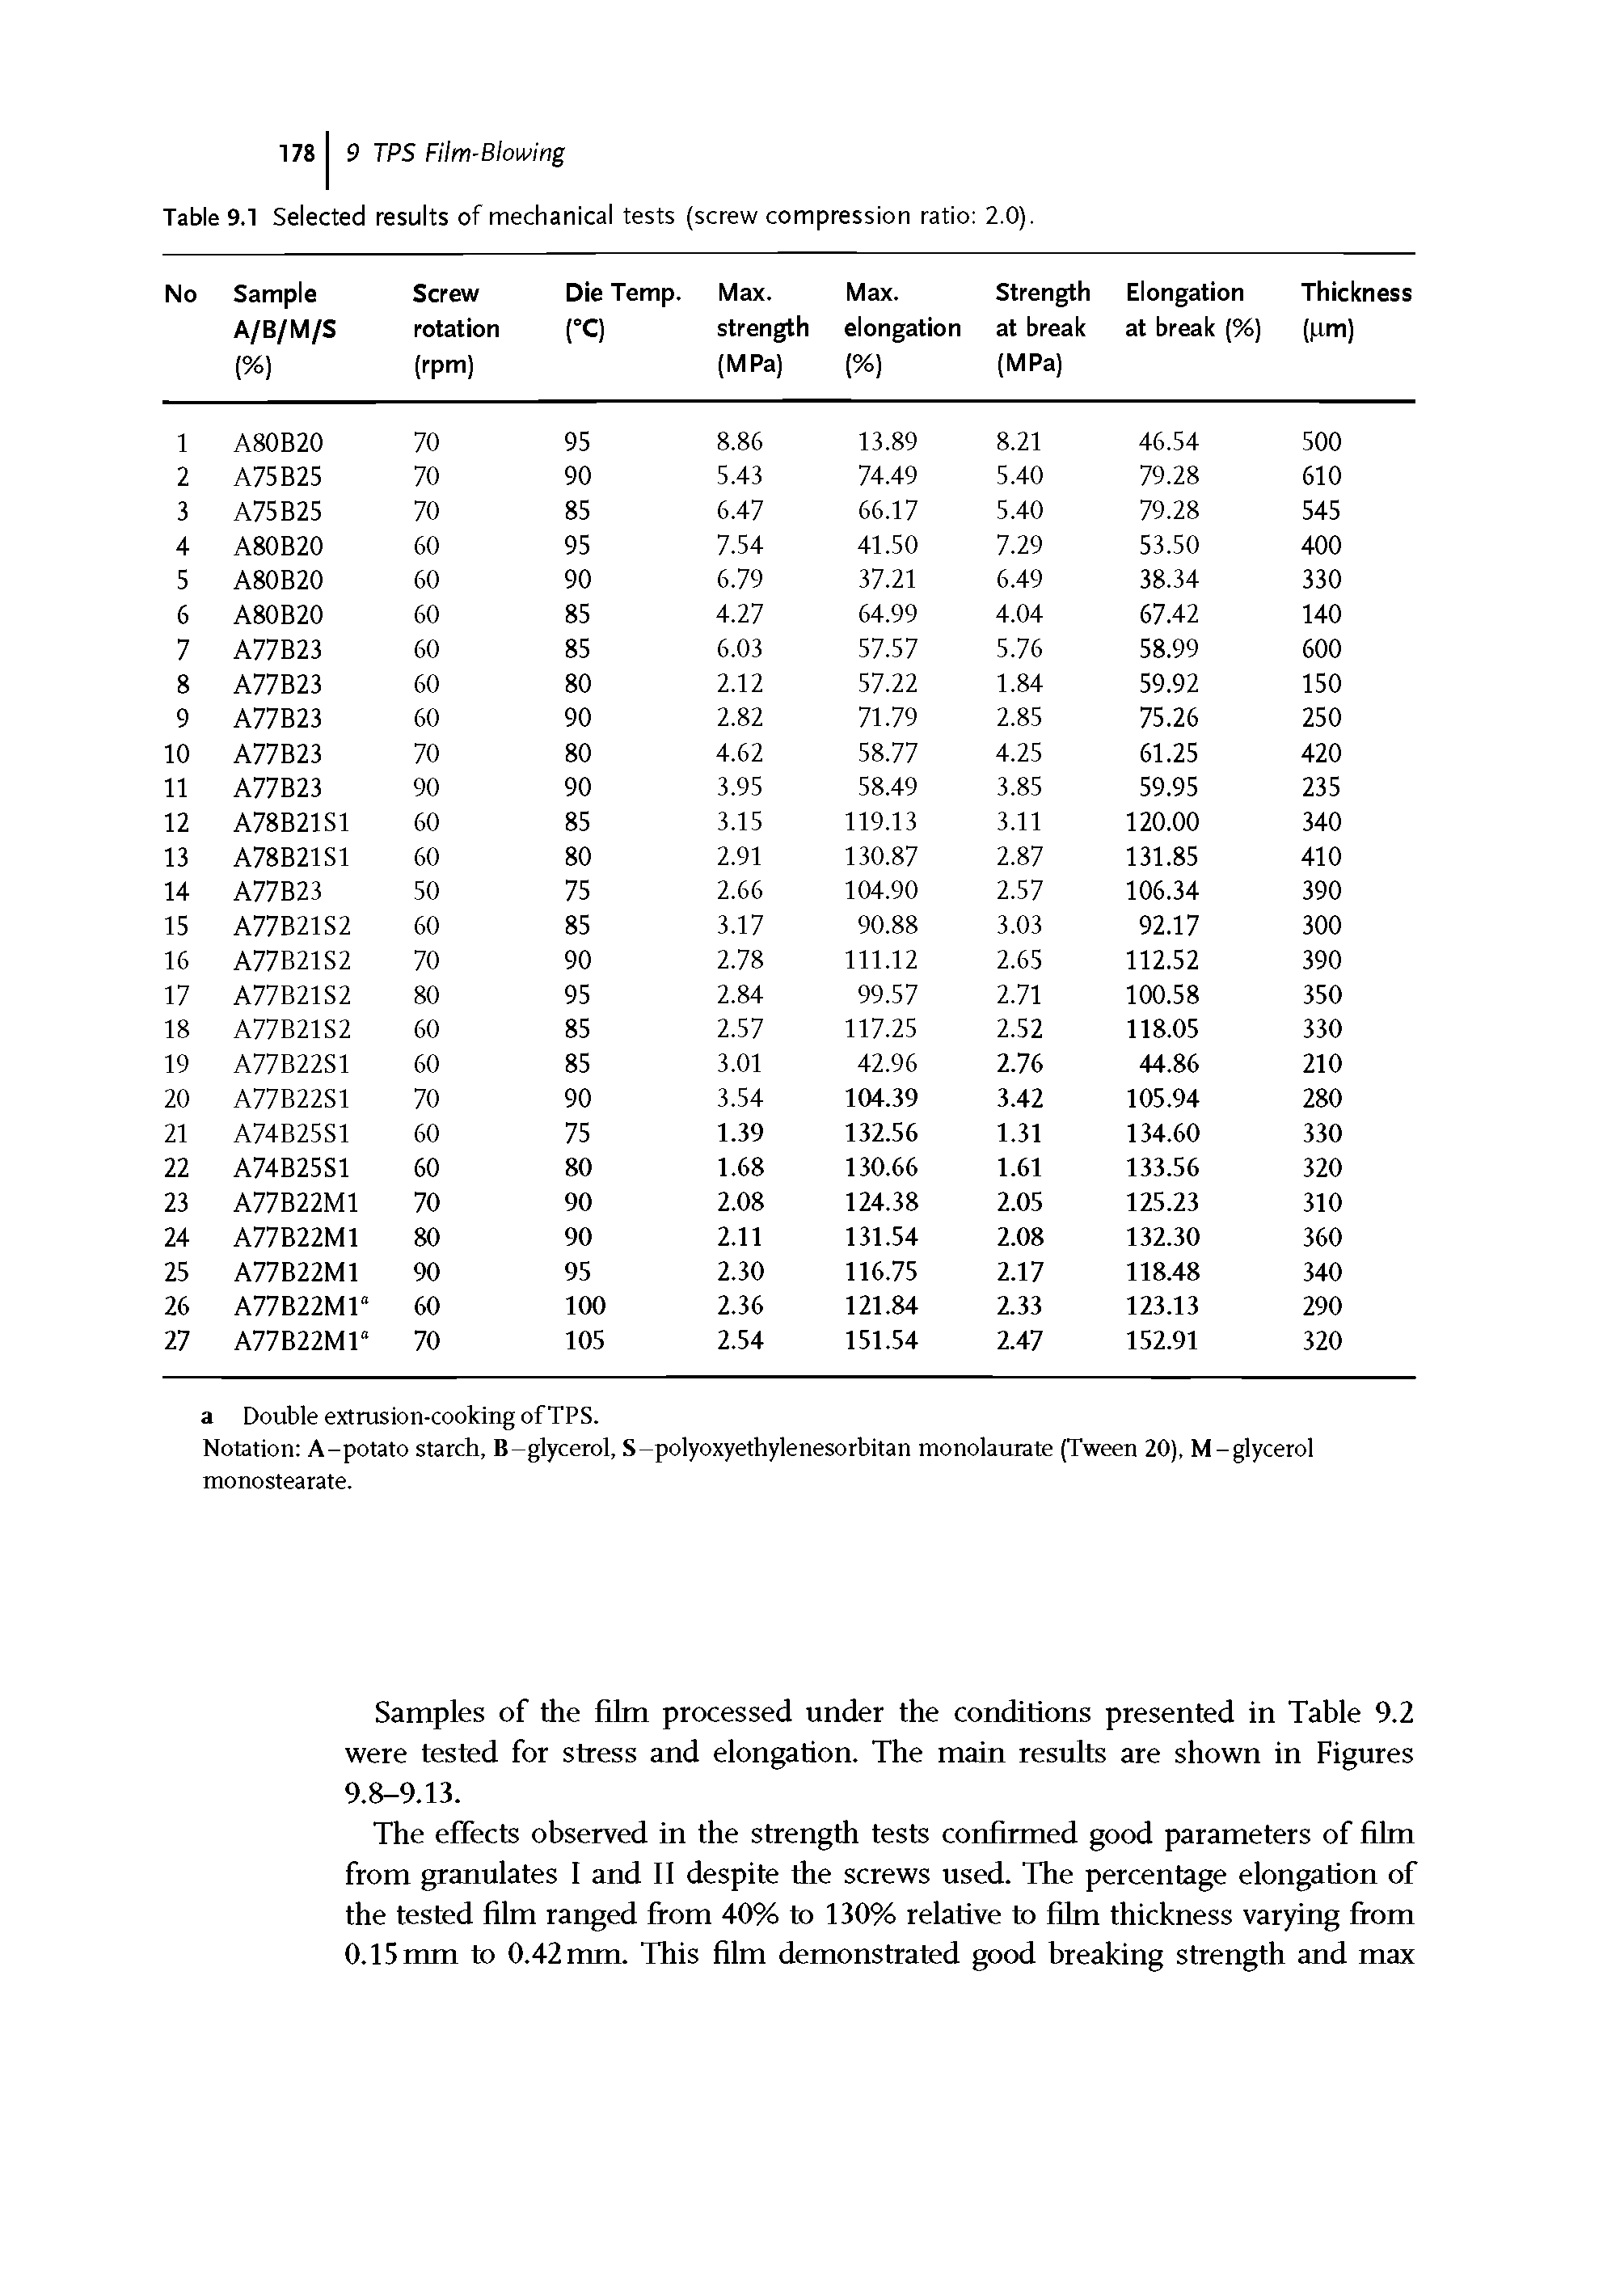 Table 9.1 Selected results of mechanical tests (screw compression ratio 2.0).